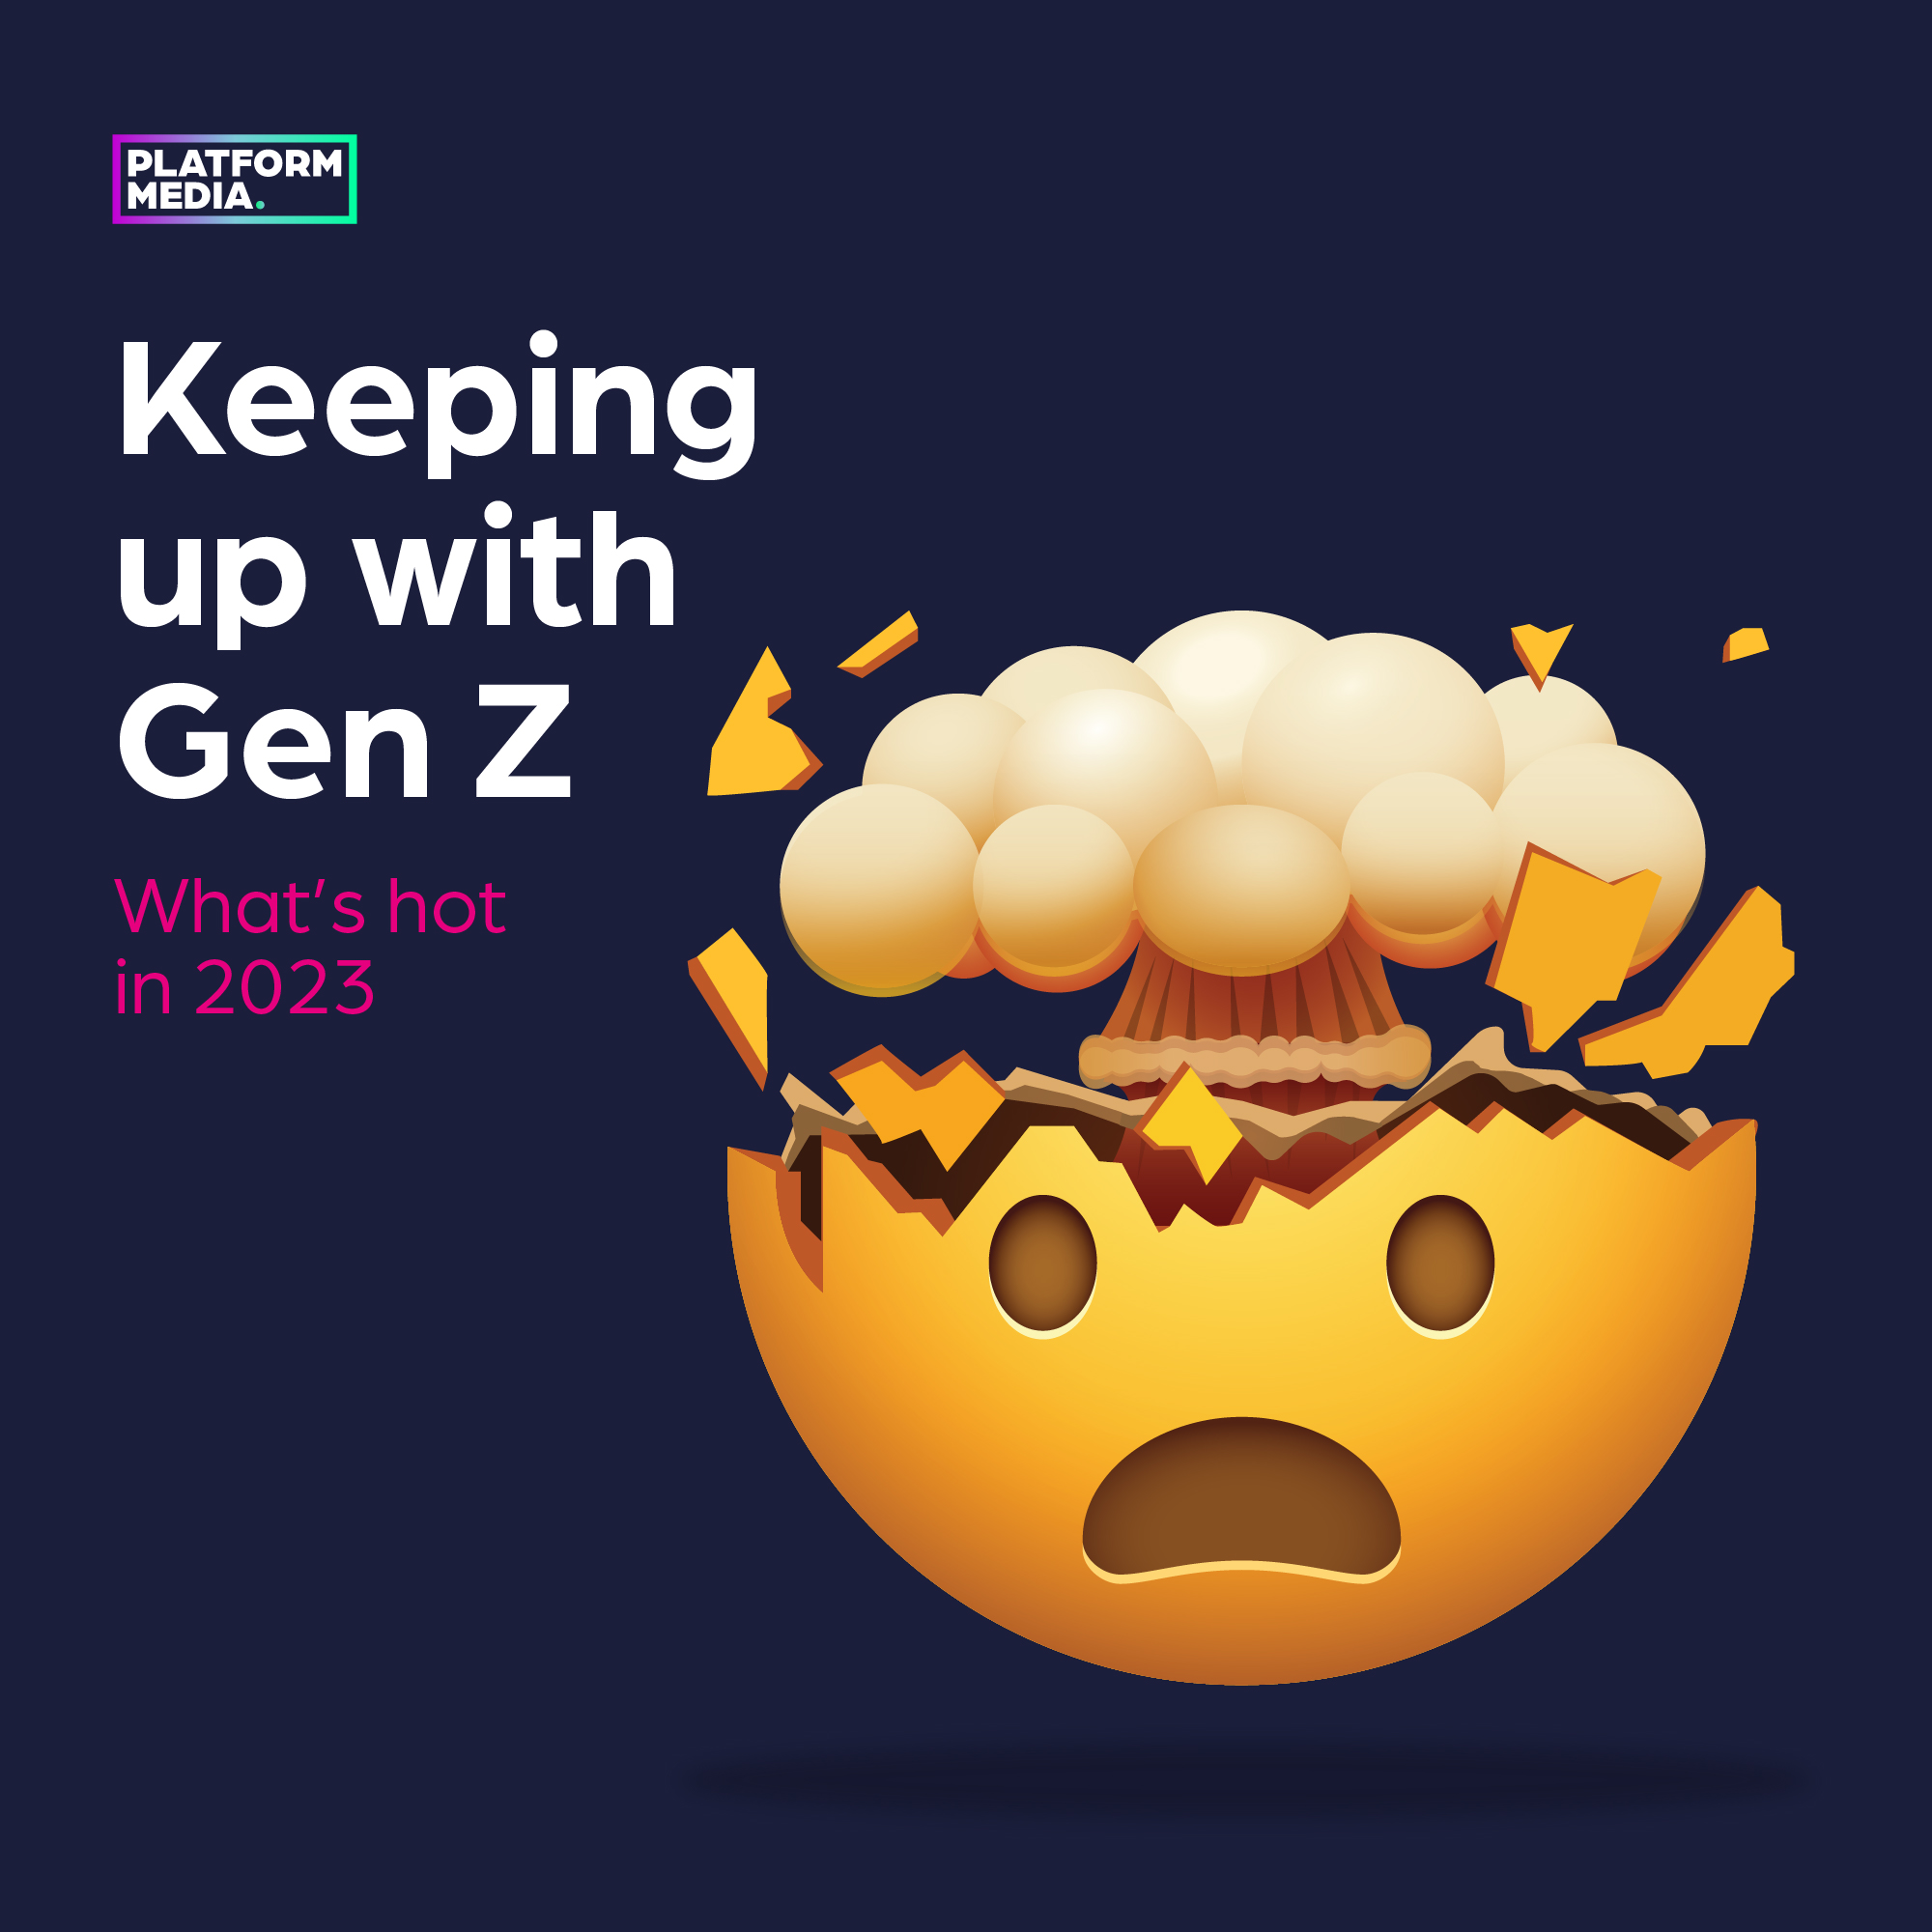 Keeping up with Gen Z: What’s hot in 2023